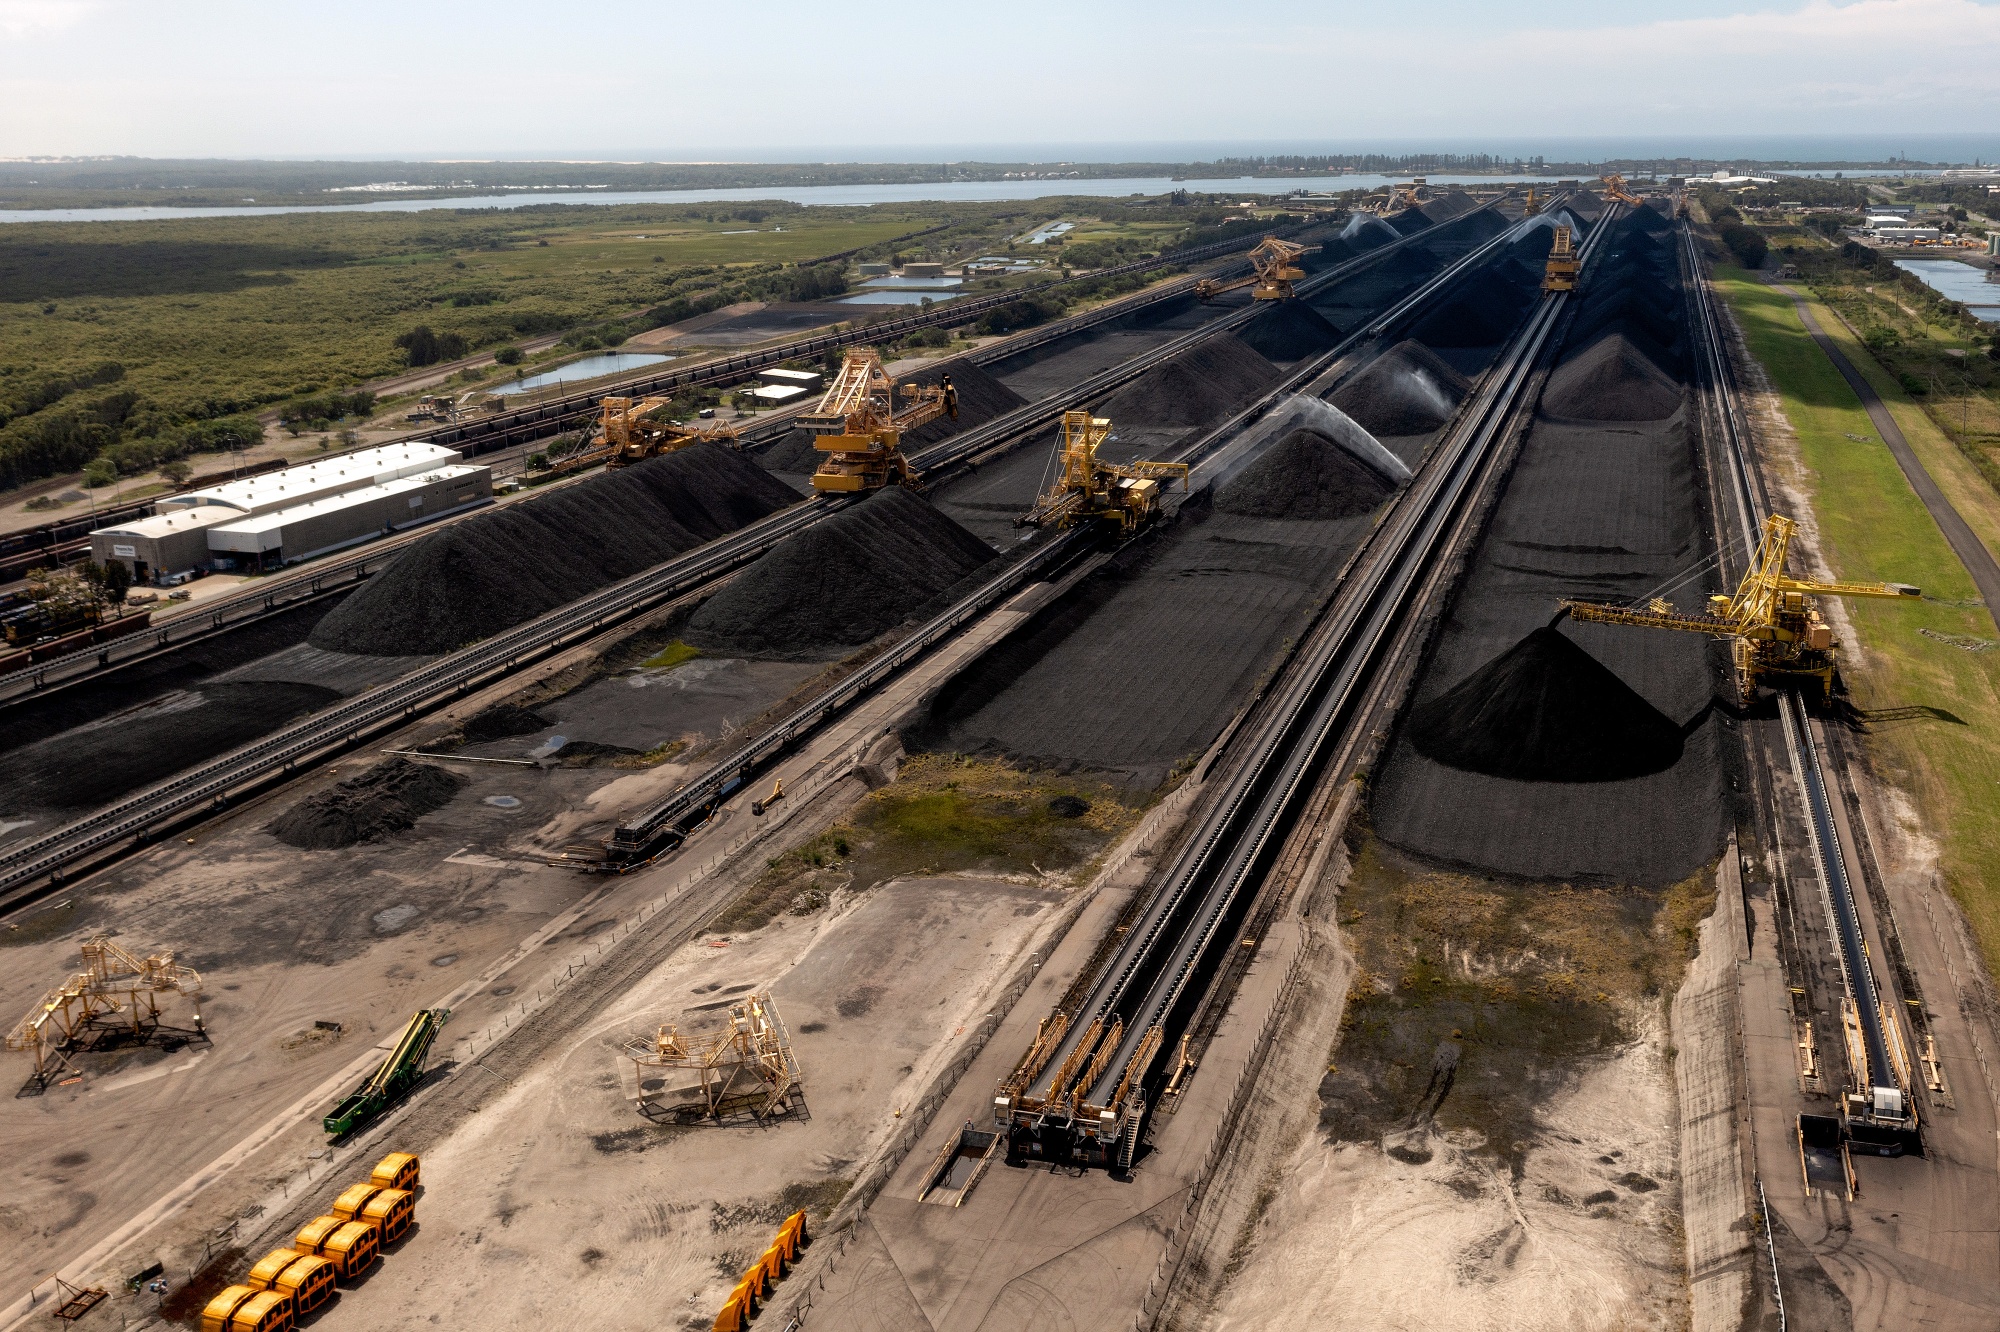 Australia’s Coal Exports by Volume Set to Rise on Asian Demand - Bloomberg